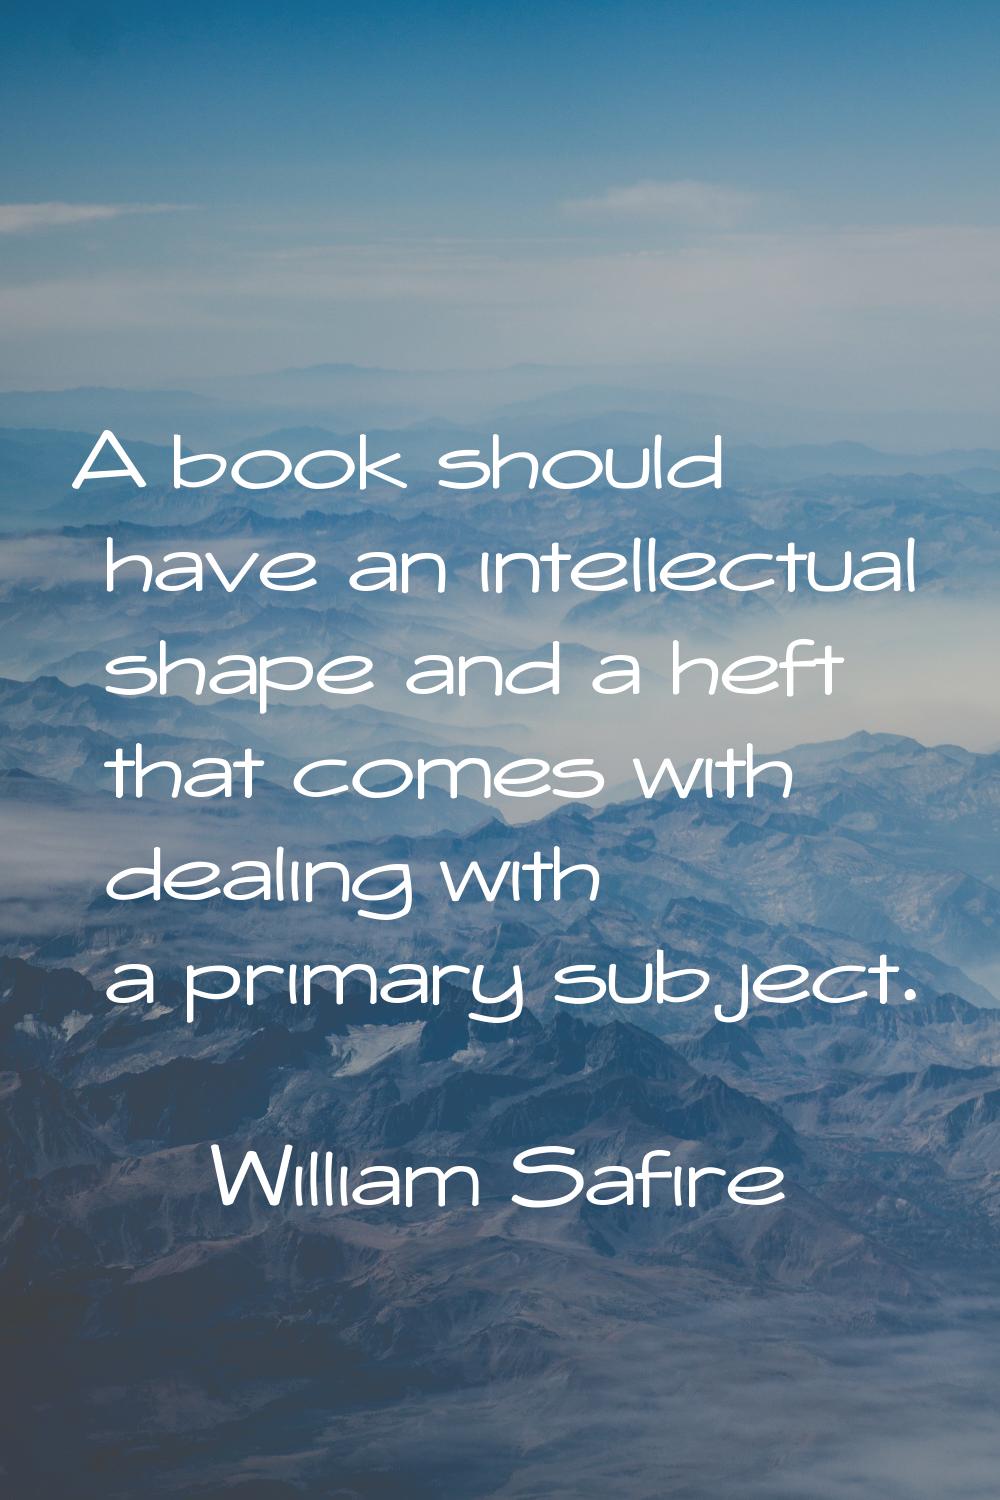 A book should have an intellectual shape and a heft that comes with dealing with a primary subject.